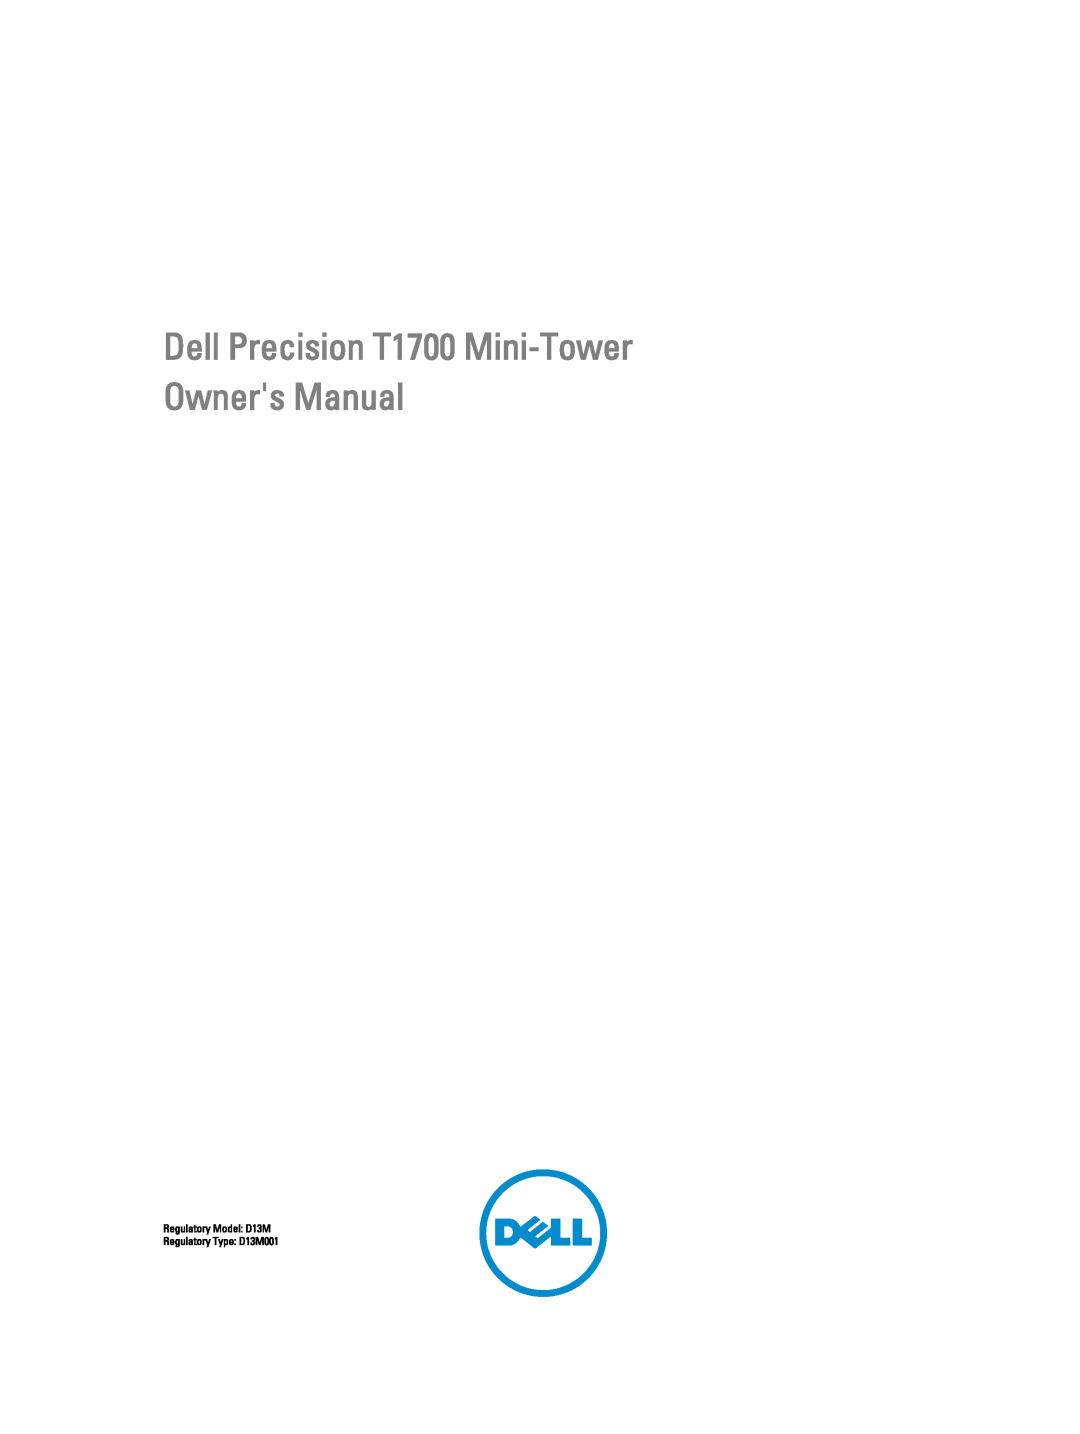 Dell T1700 manual Reference, Volatility Description, User Accessible, Remedial Action, Designator, for external data 